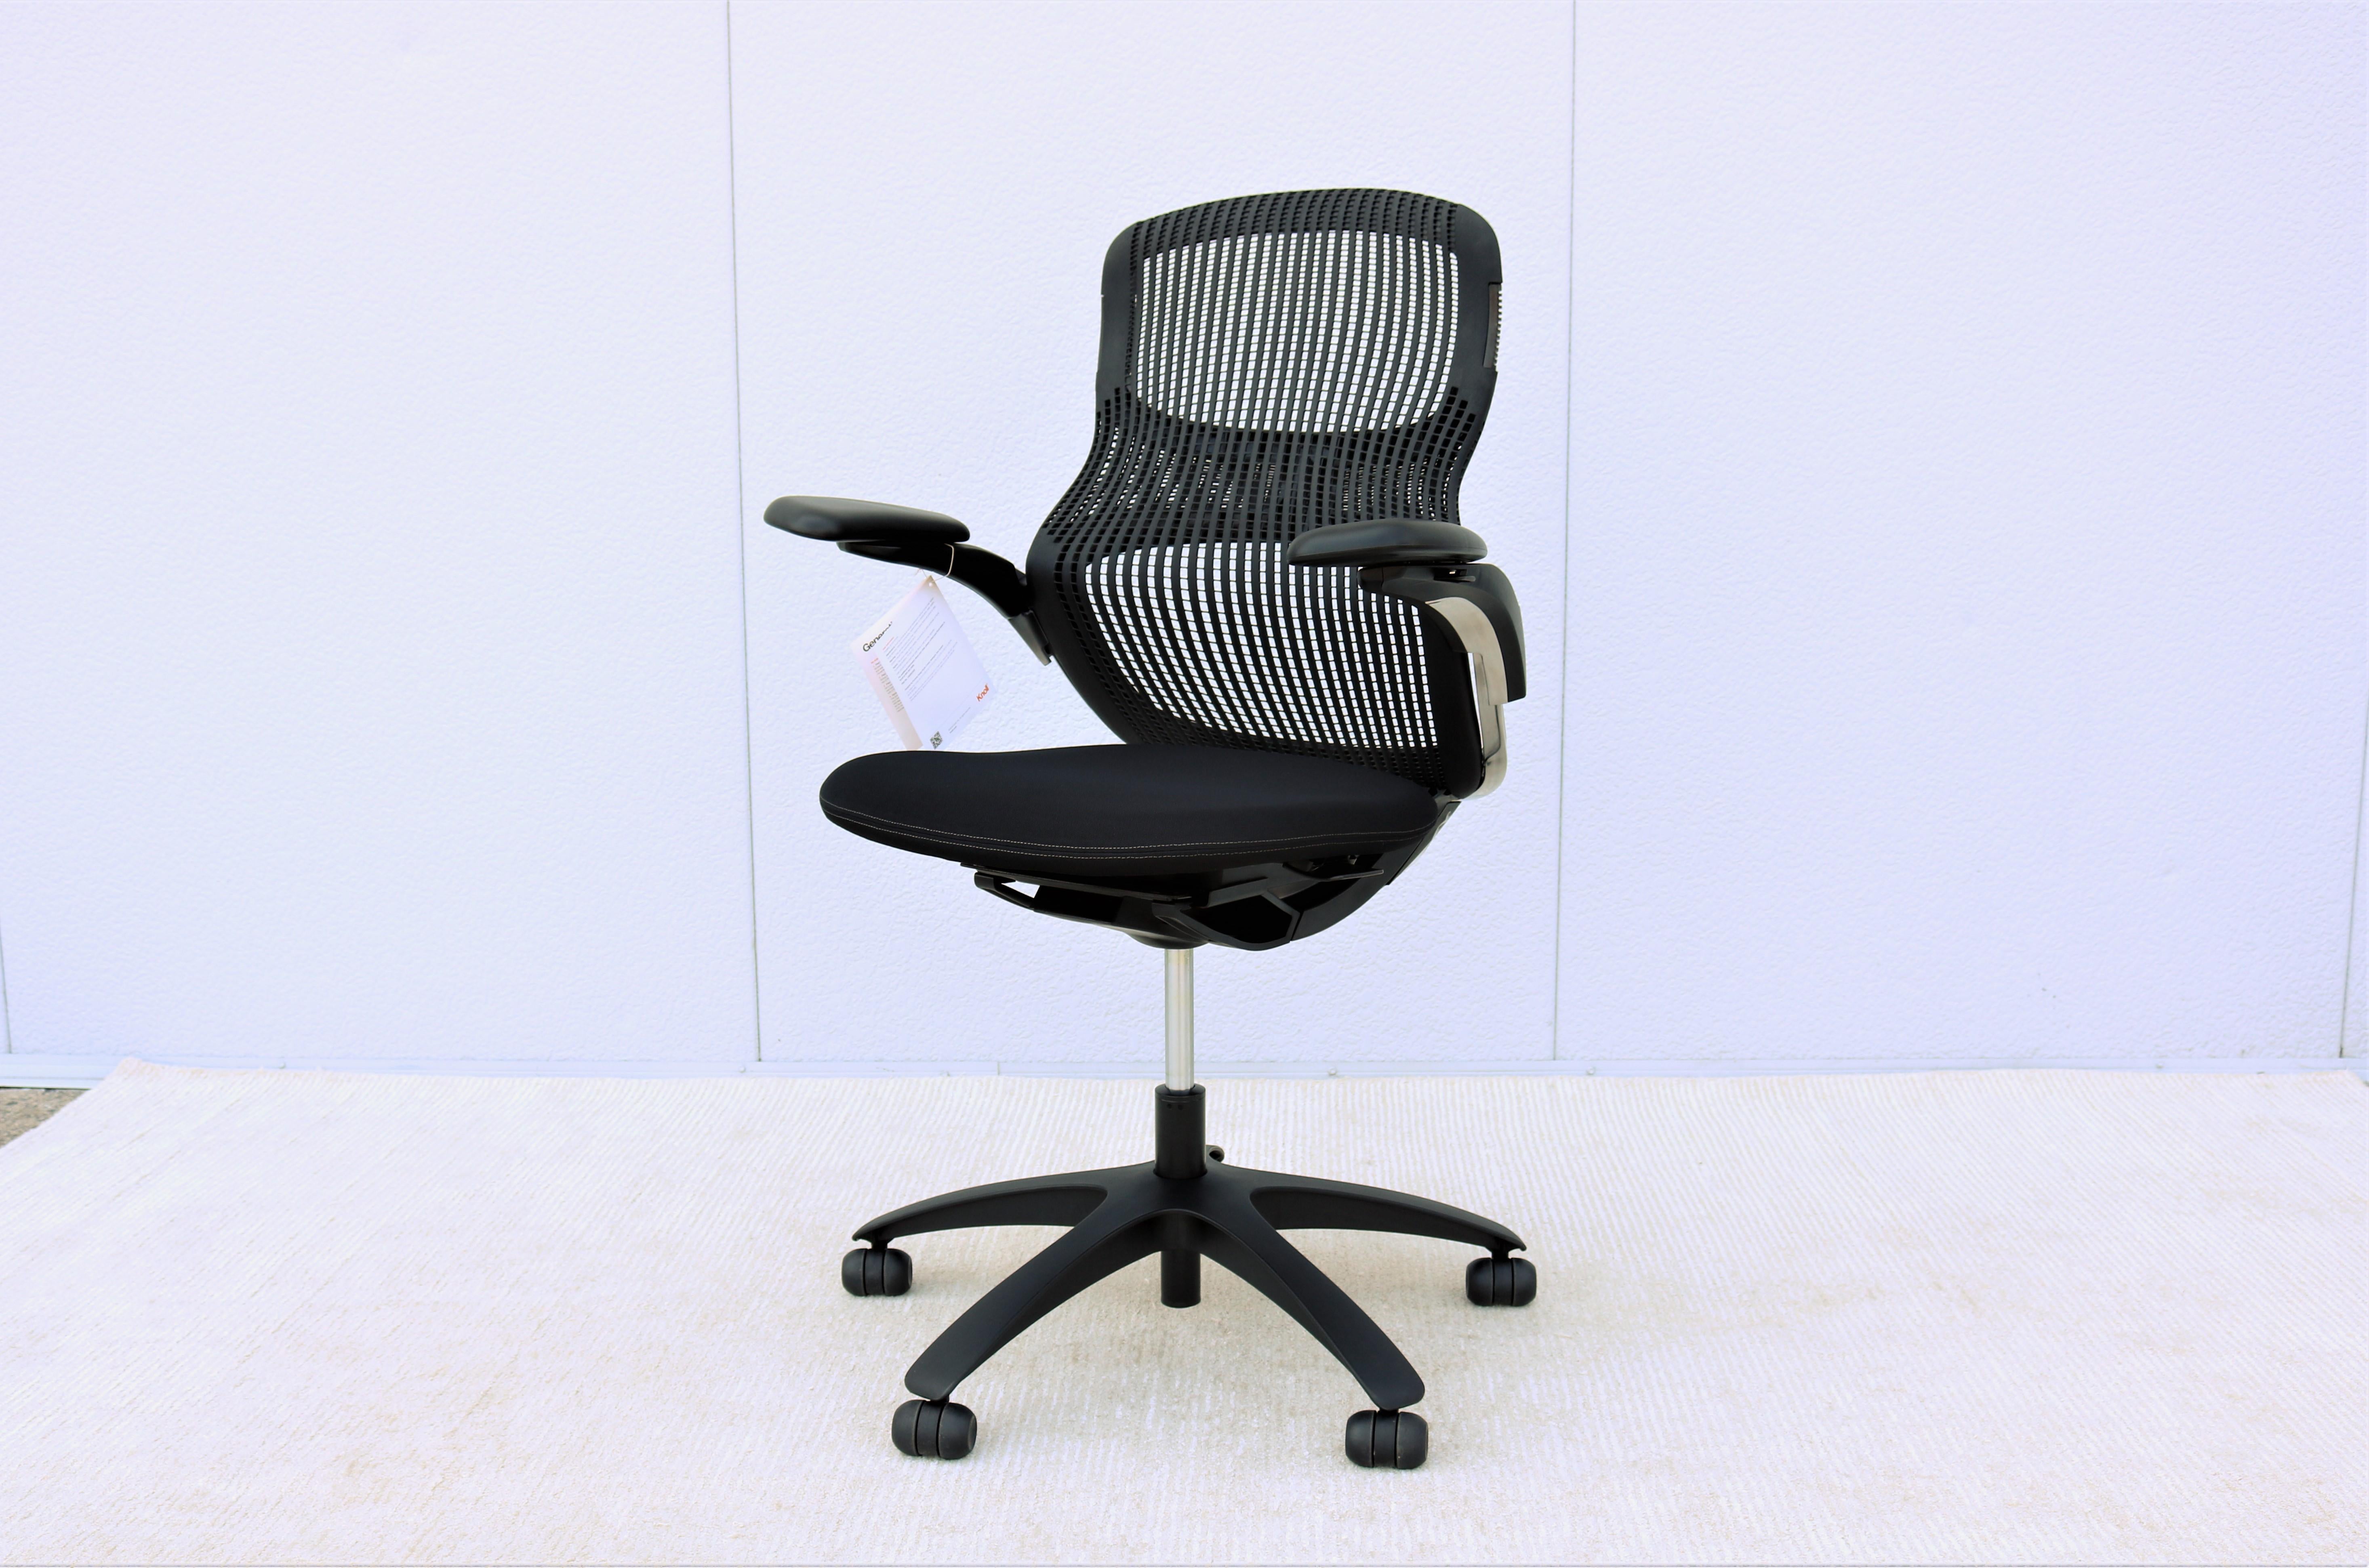 American Knoll Generation Black Ergonomic Office Desk Chair Fully Adjustable, Brand New For Sale